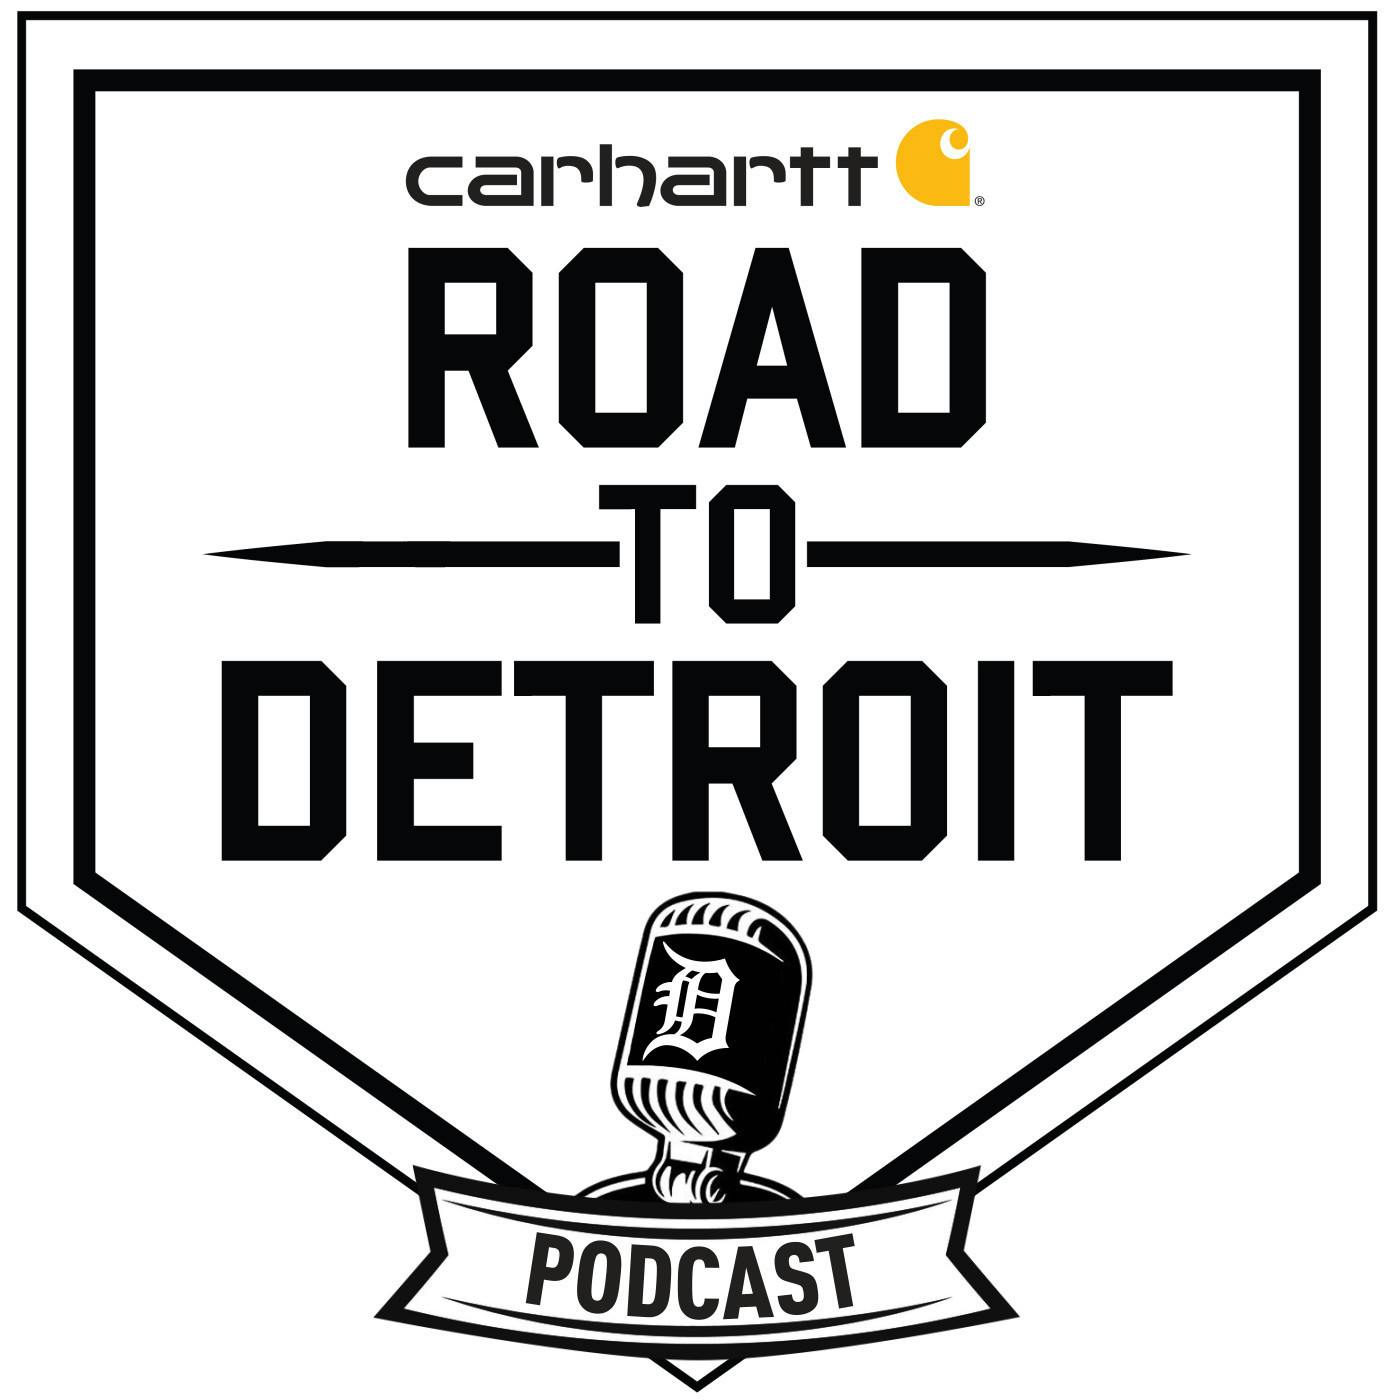 Road To Detroit presented by Carhartt Episode 4: Tork Bomb